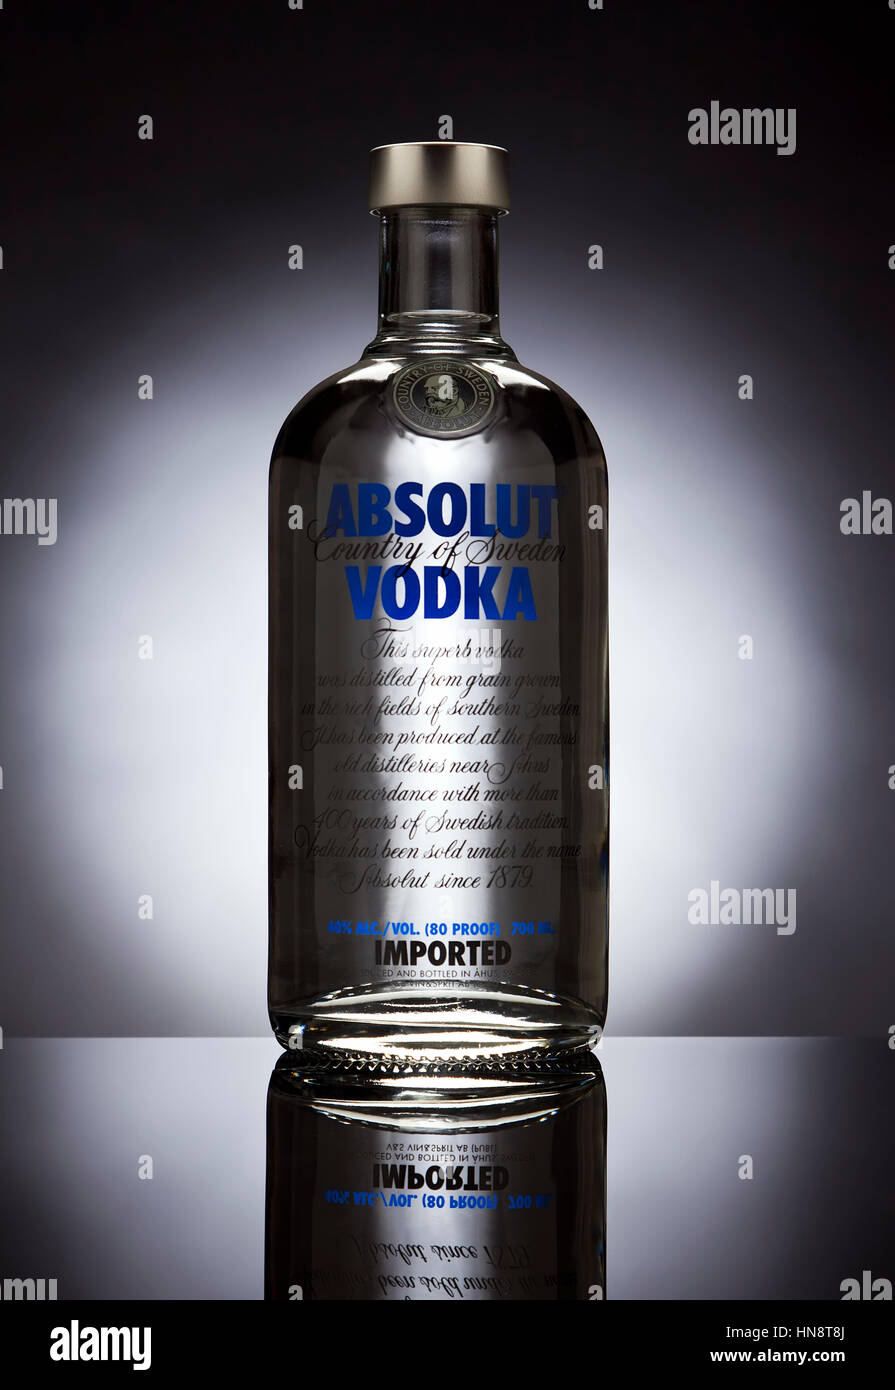 Absolut Vodka bottle in studio setup. Absoplut Vodka is produced near Åhus in Sweden. Since July 2008 the company has been owned by Pernod Ricard Stock Photo